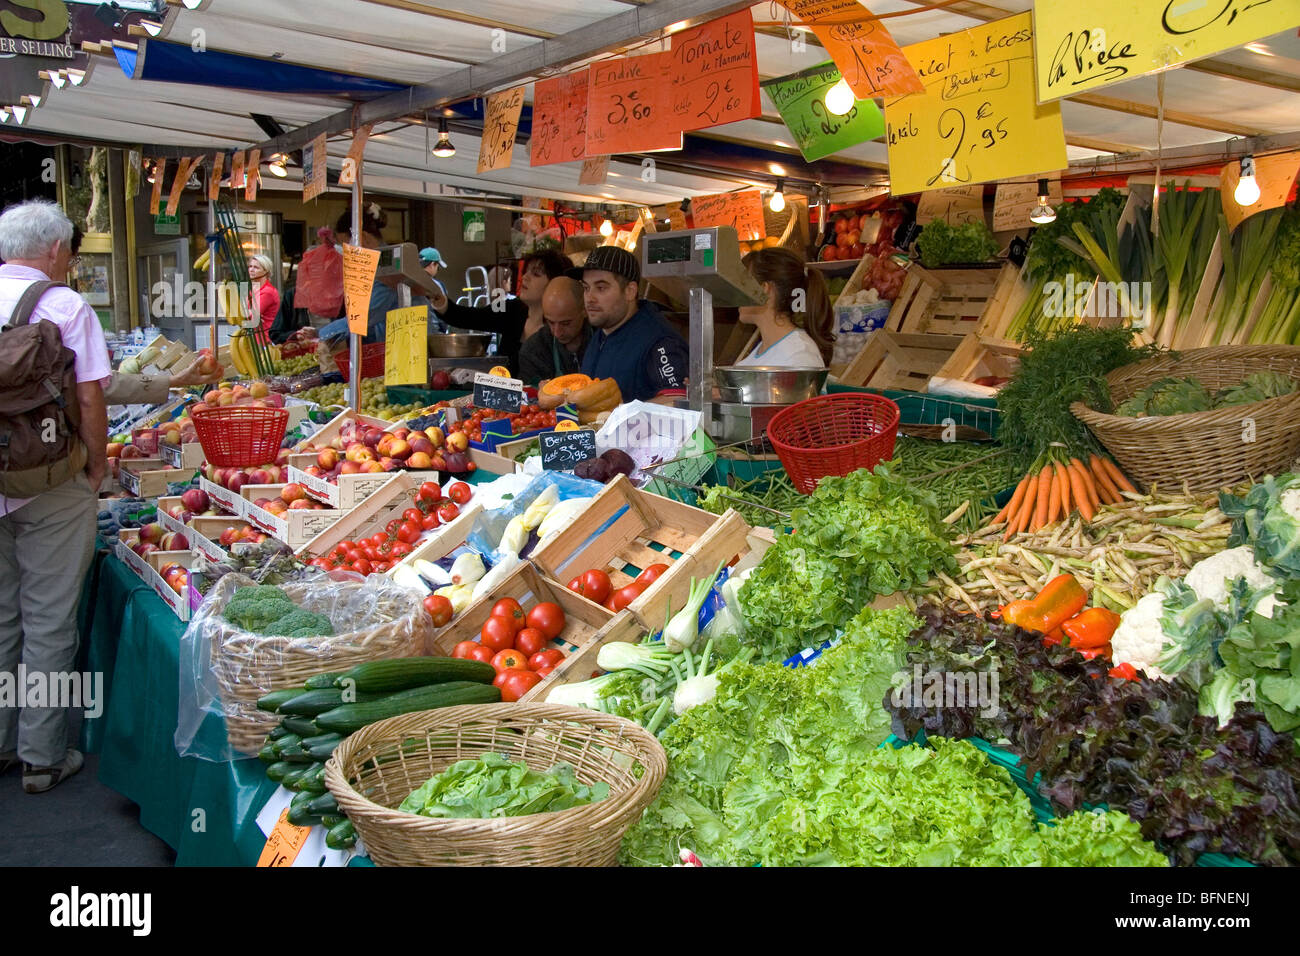 People shopping for produce at an outdoor Saturday market in Paris, France. Stock Photo